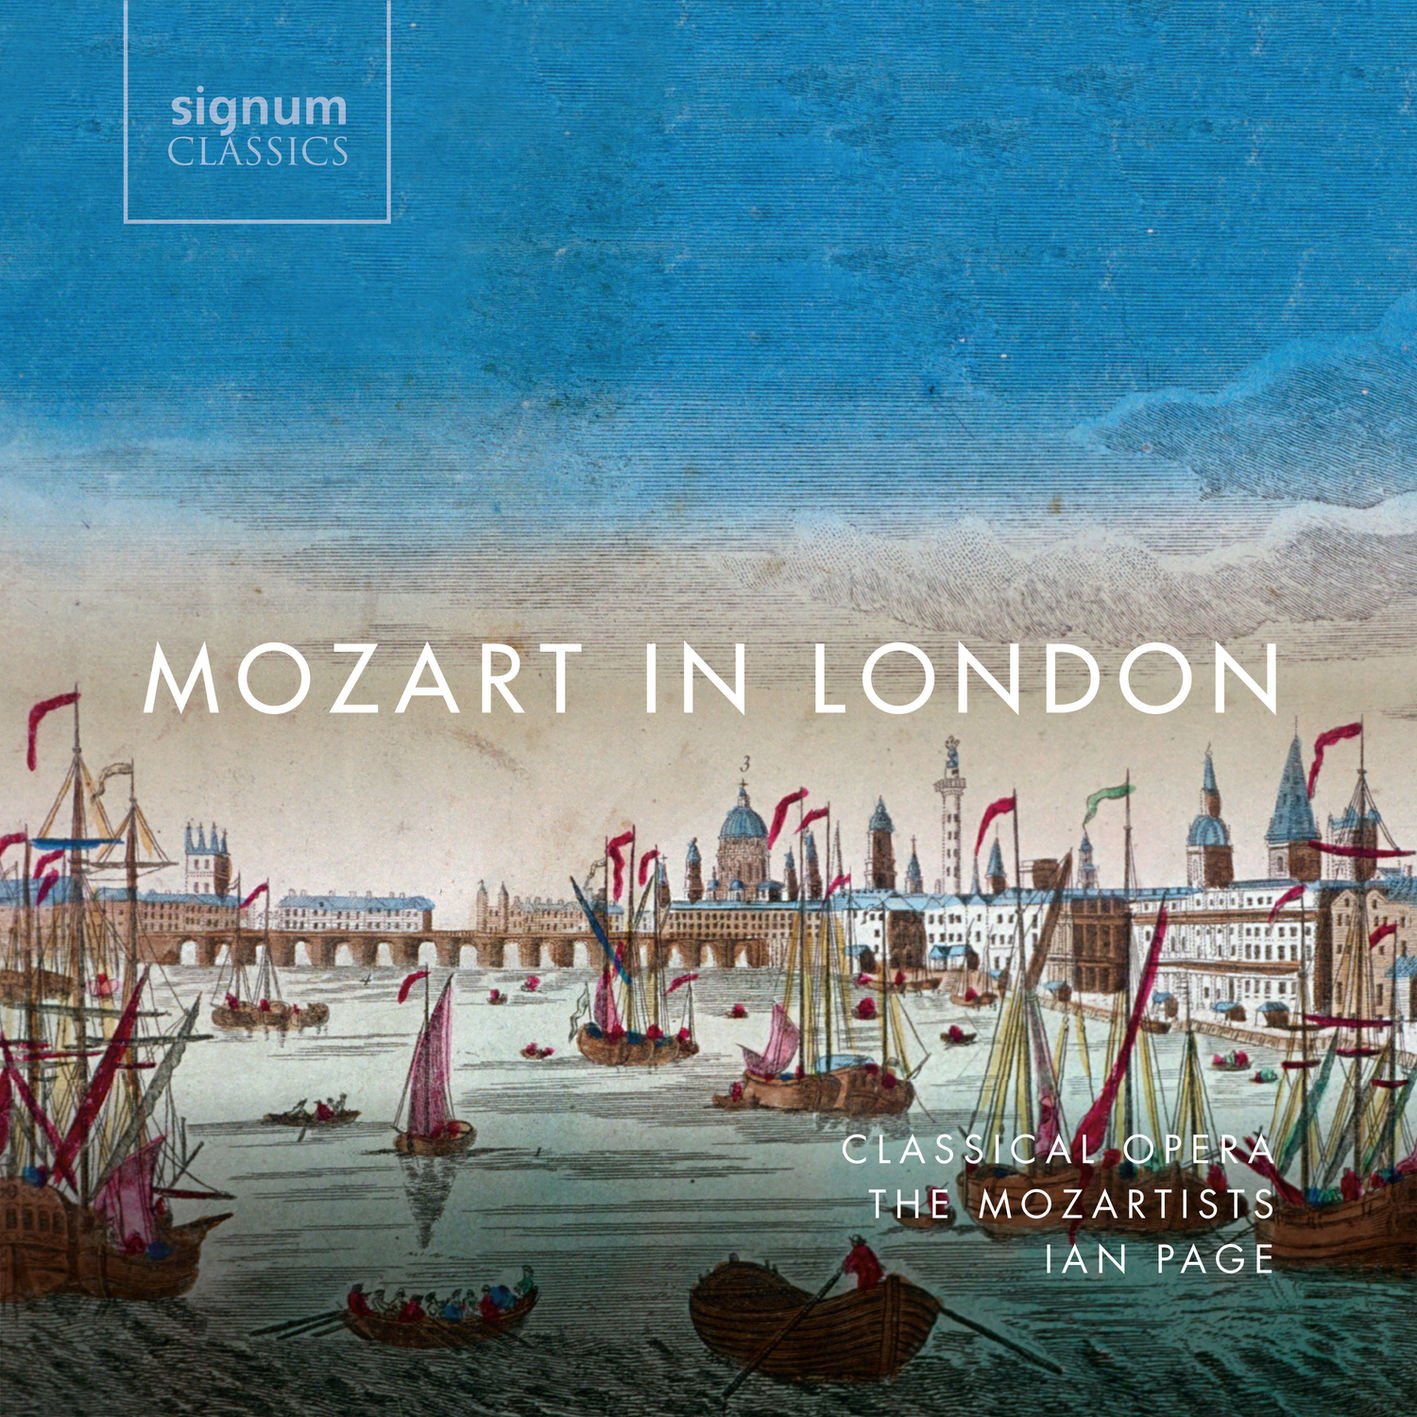 Ian Page & Classical Opera / The Mozartists - Mozart in London (2018) [FLAC 24bit/96kHz]